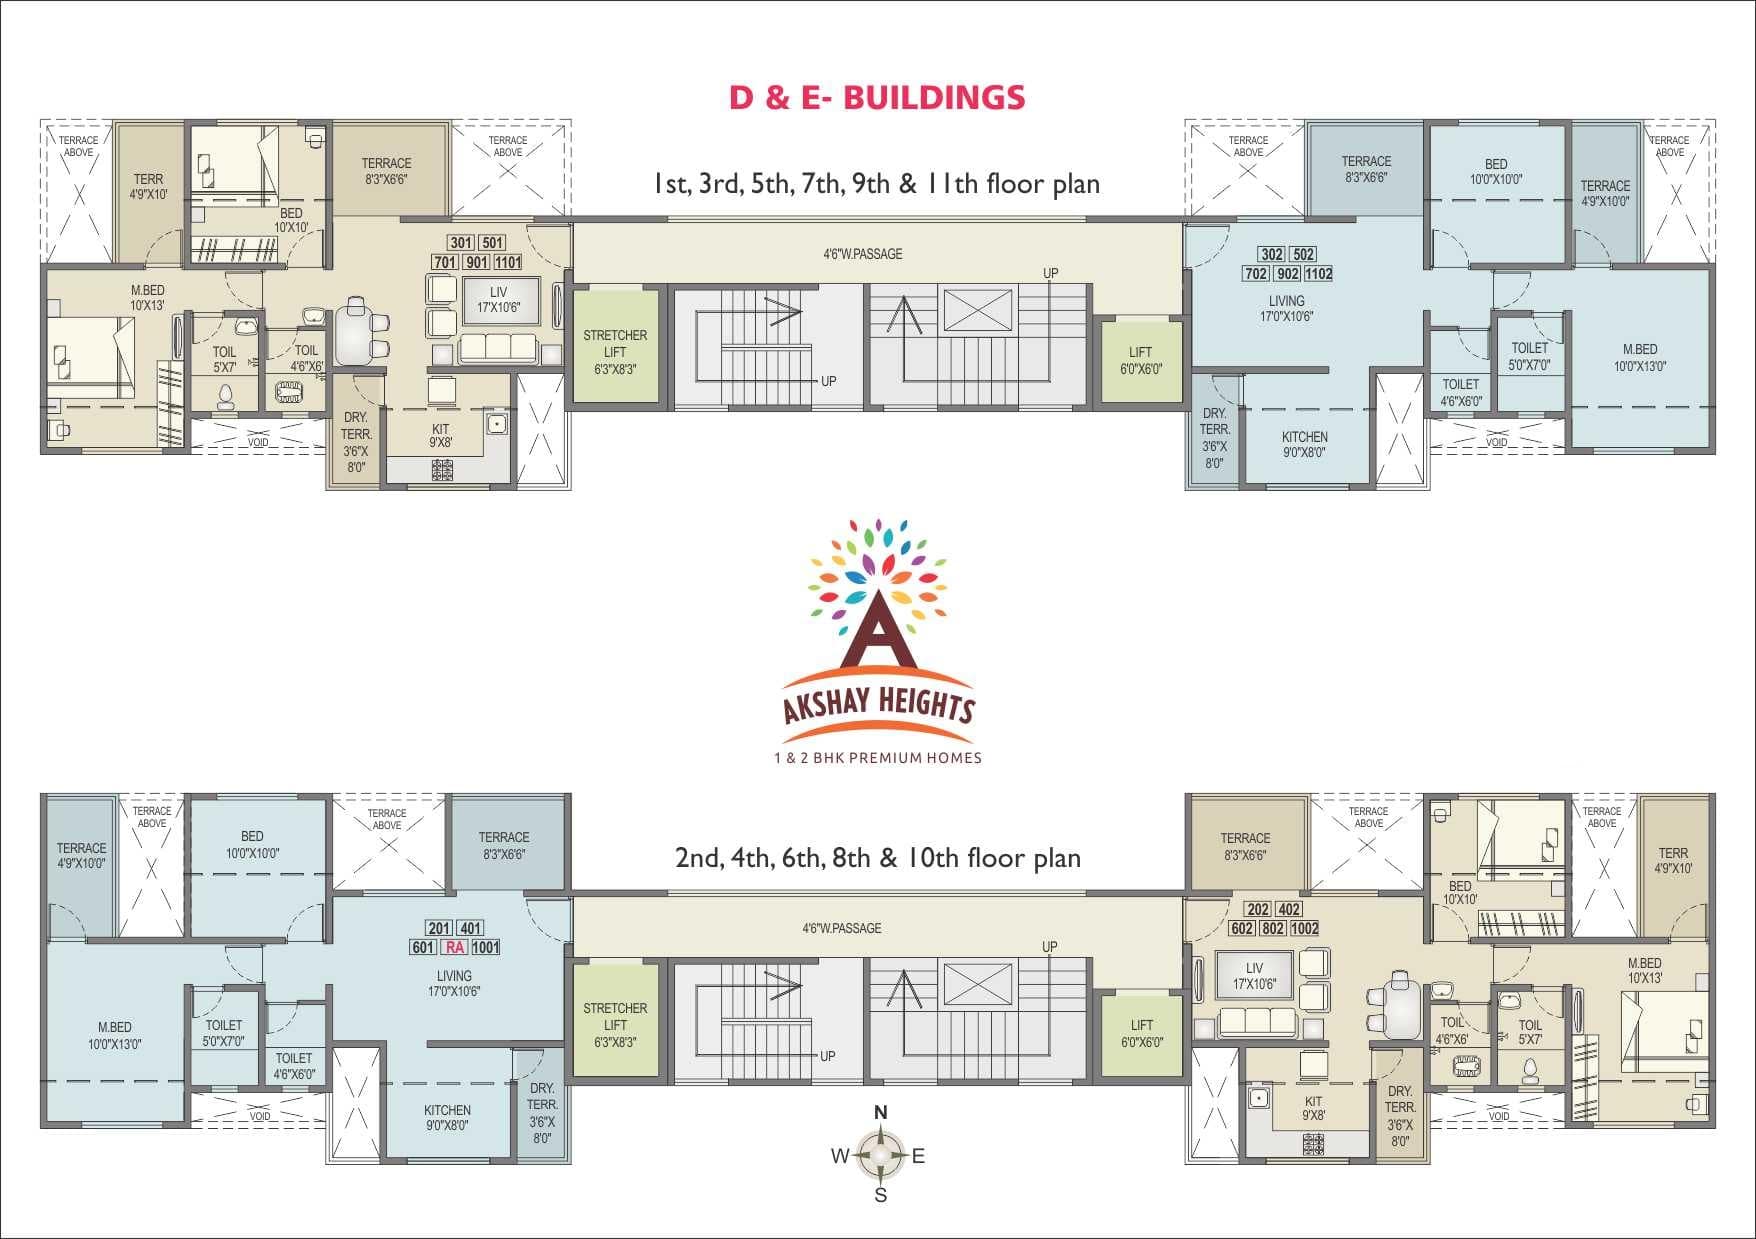 Akshay Heights Building D and E Floor Plan